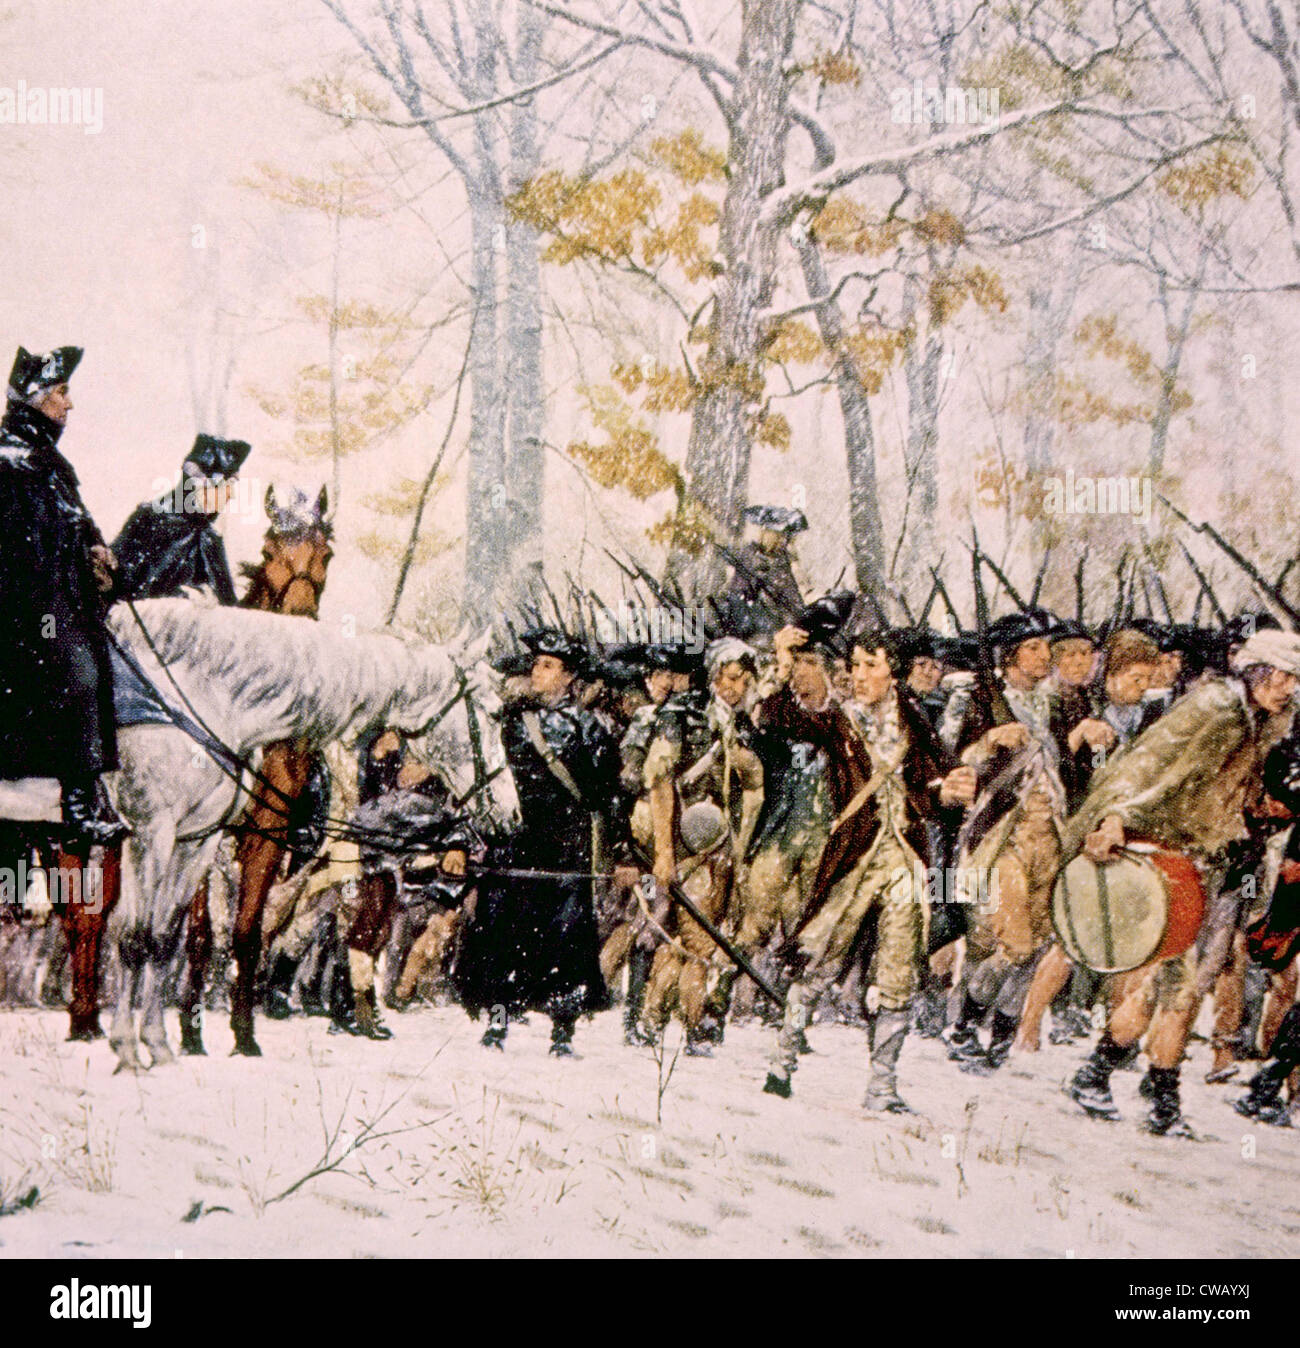 General George Washington (left) with his army at Valley Forge, Pennsylvania during the winter of 1777-1778, from the Valley Stock Photo